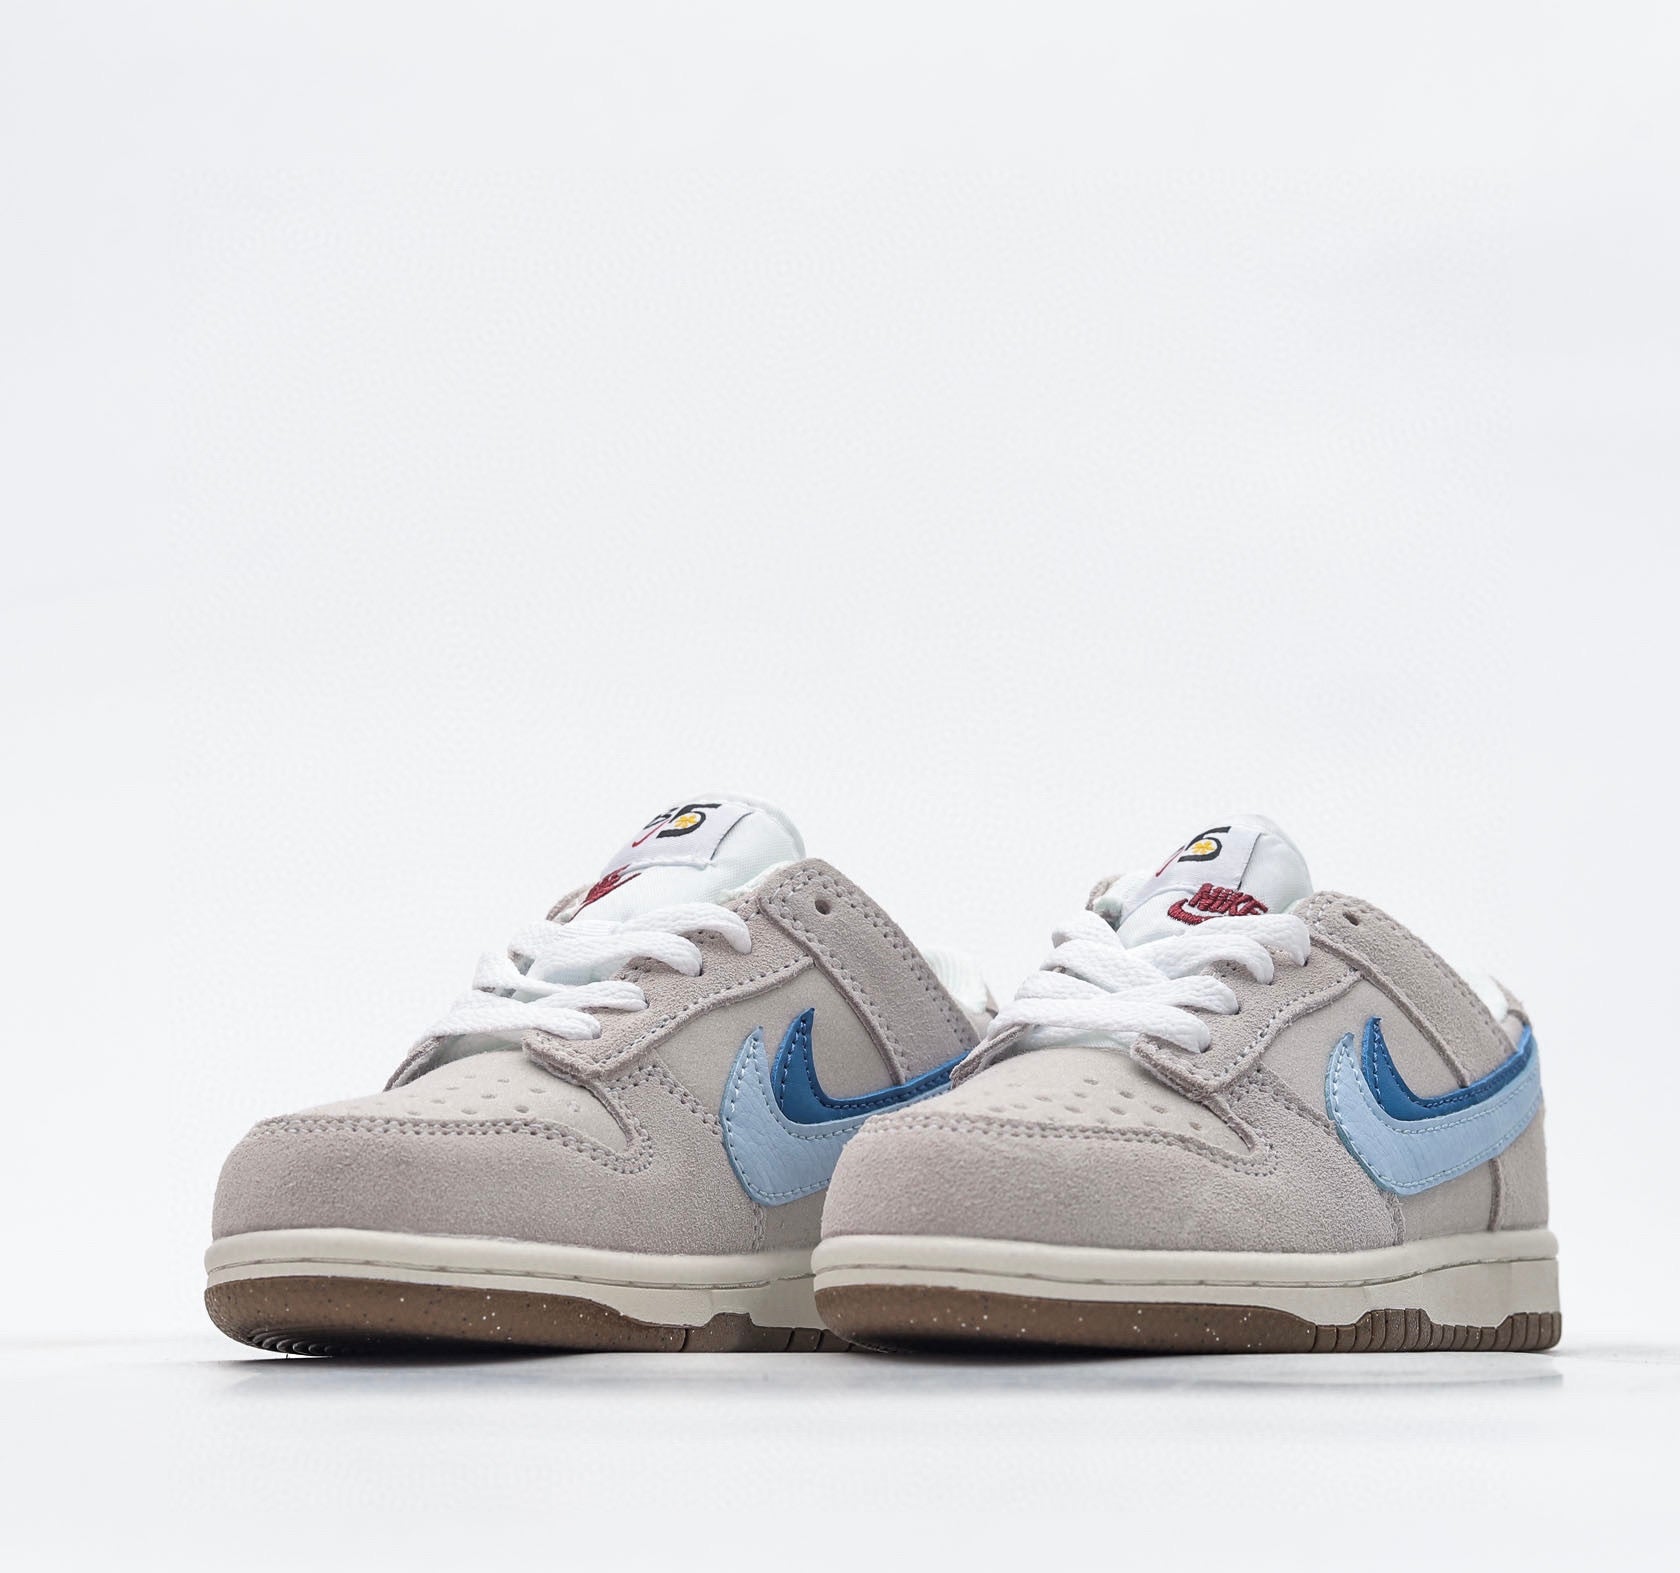 Nike SB grey and blue  shoes